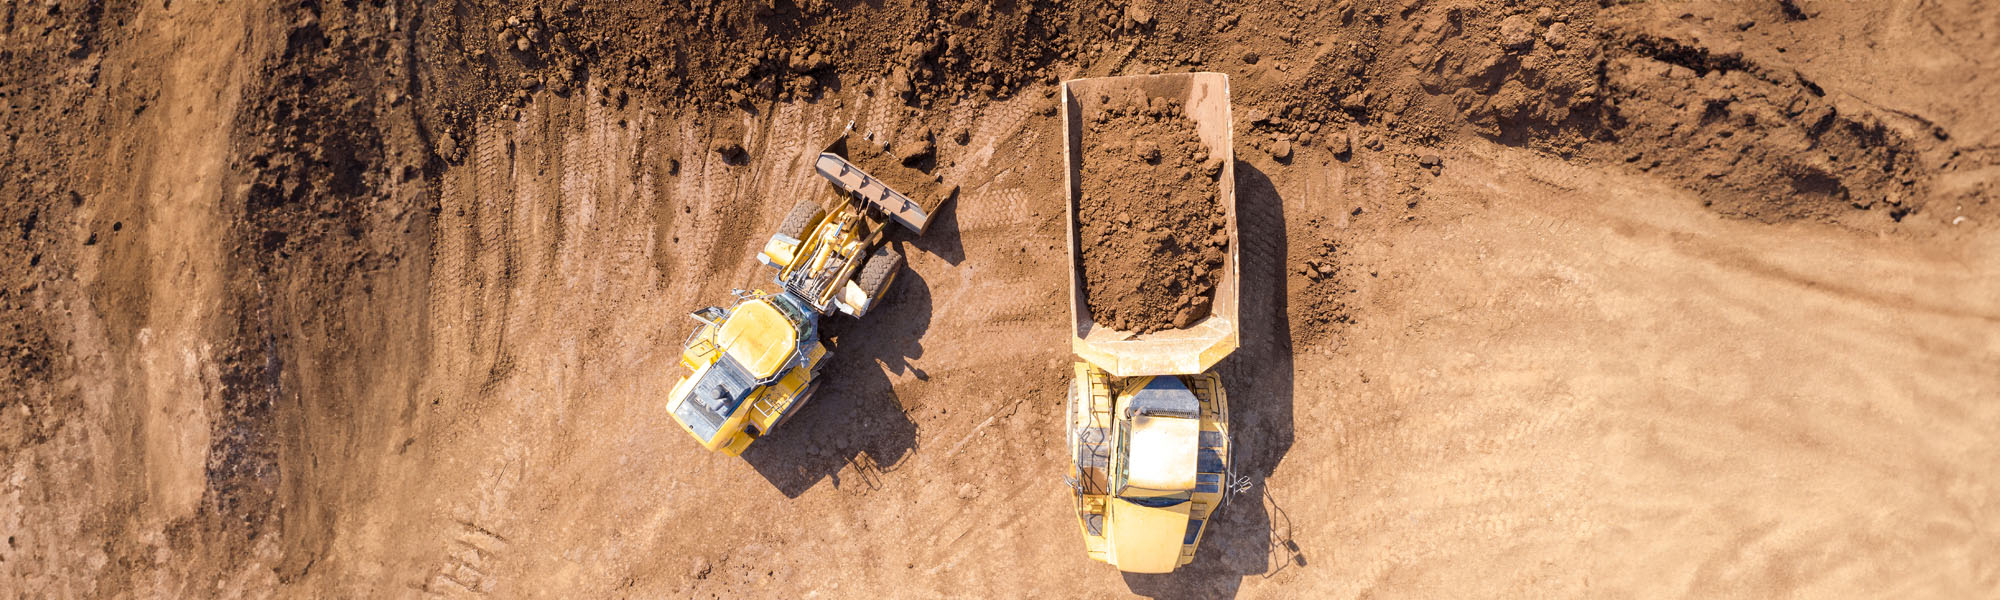 excavator loading soil onto an articulated hauler